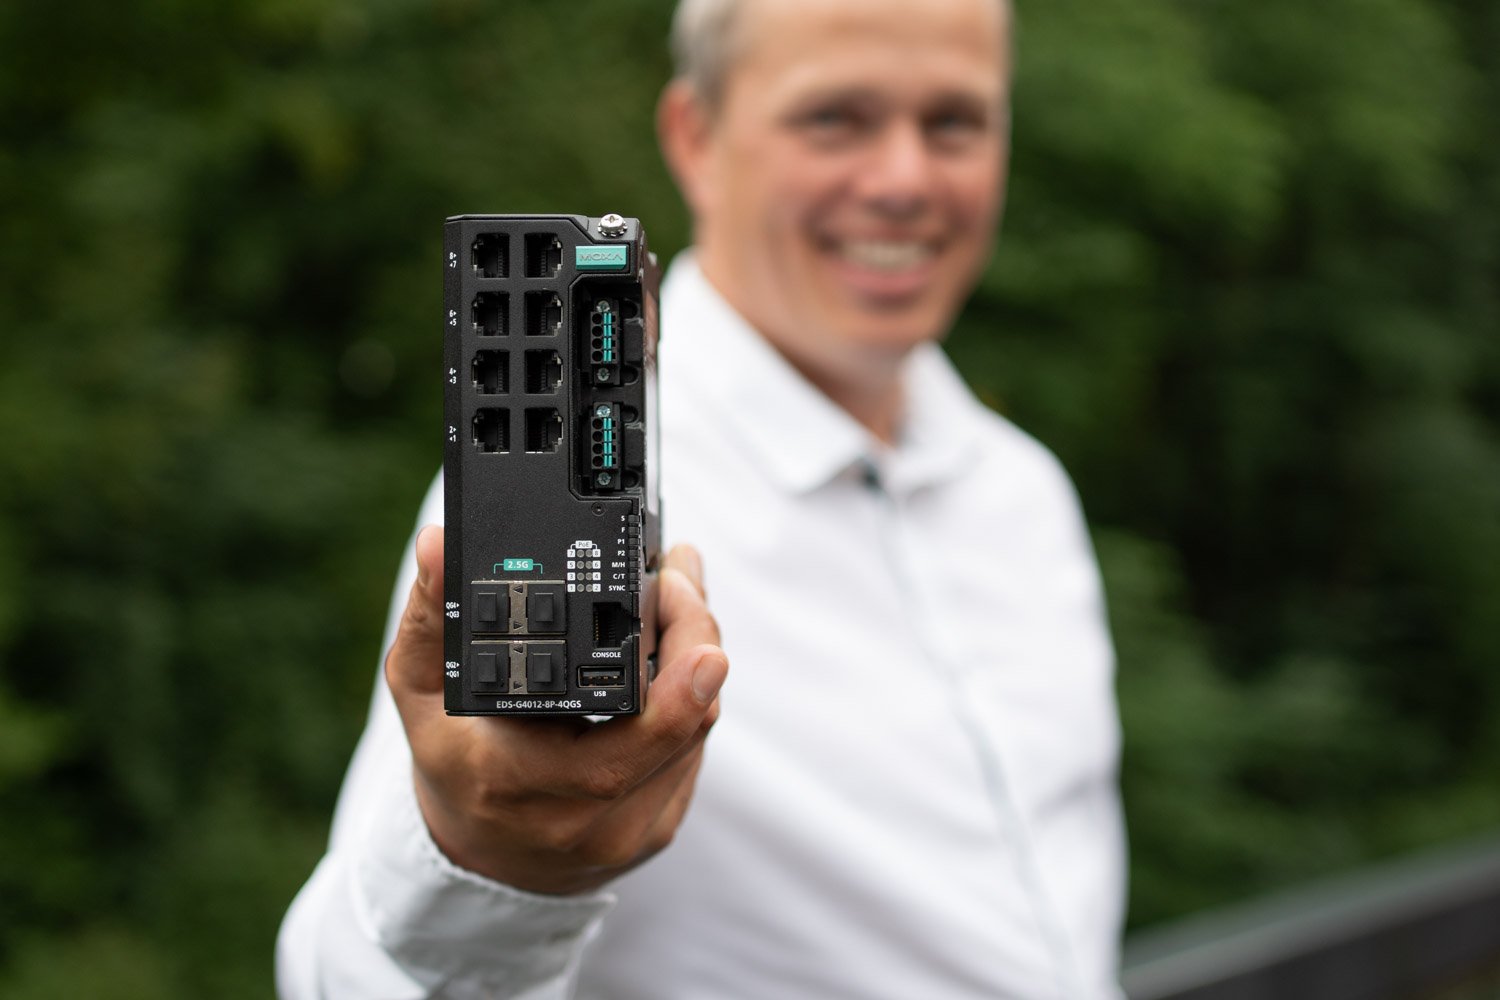 Mr. Gøran Labrå of Hatteland Technology holds up the Moxa EDS-G4012 to the camera. The unit is in focus, while Mr. Labrå is blurred out. He is smiling and wearing a white shirt. The background is made up of green trees.